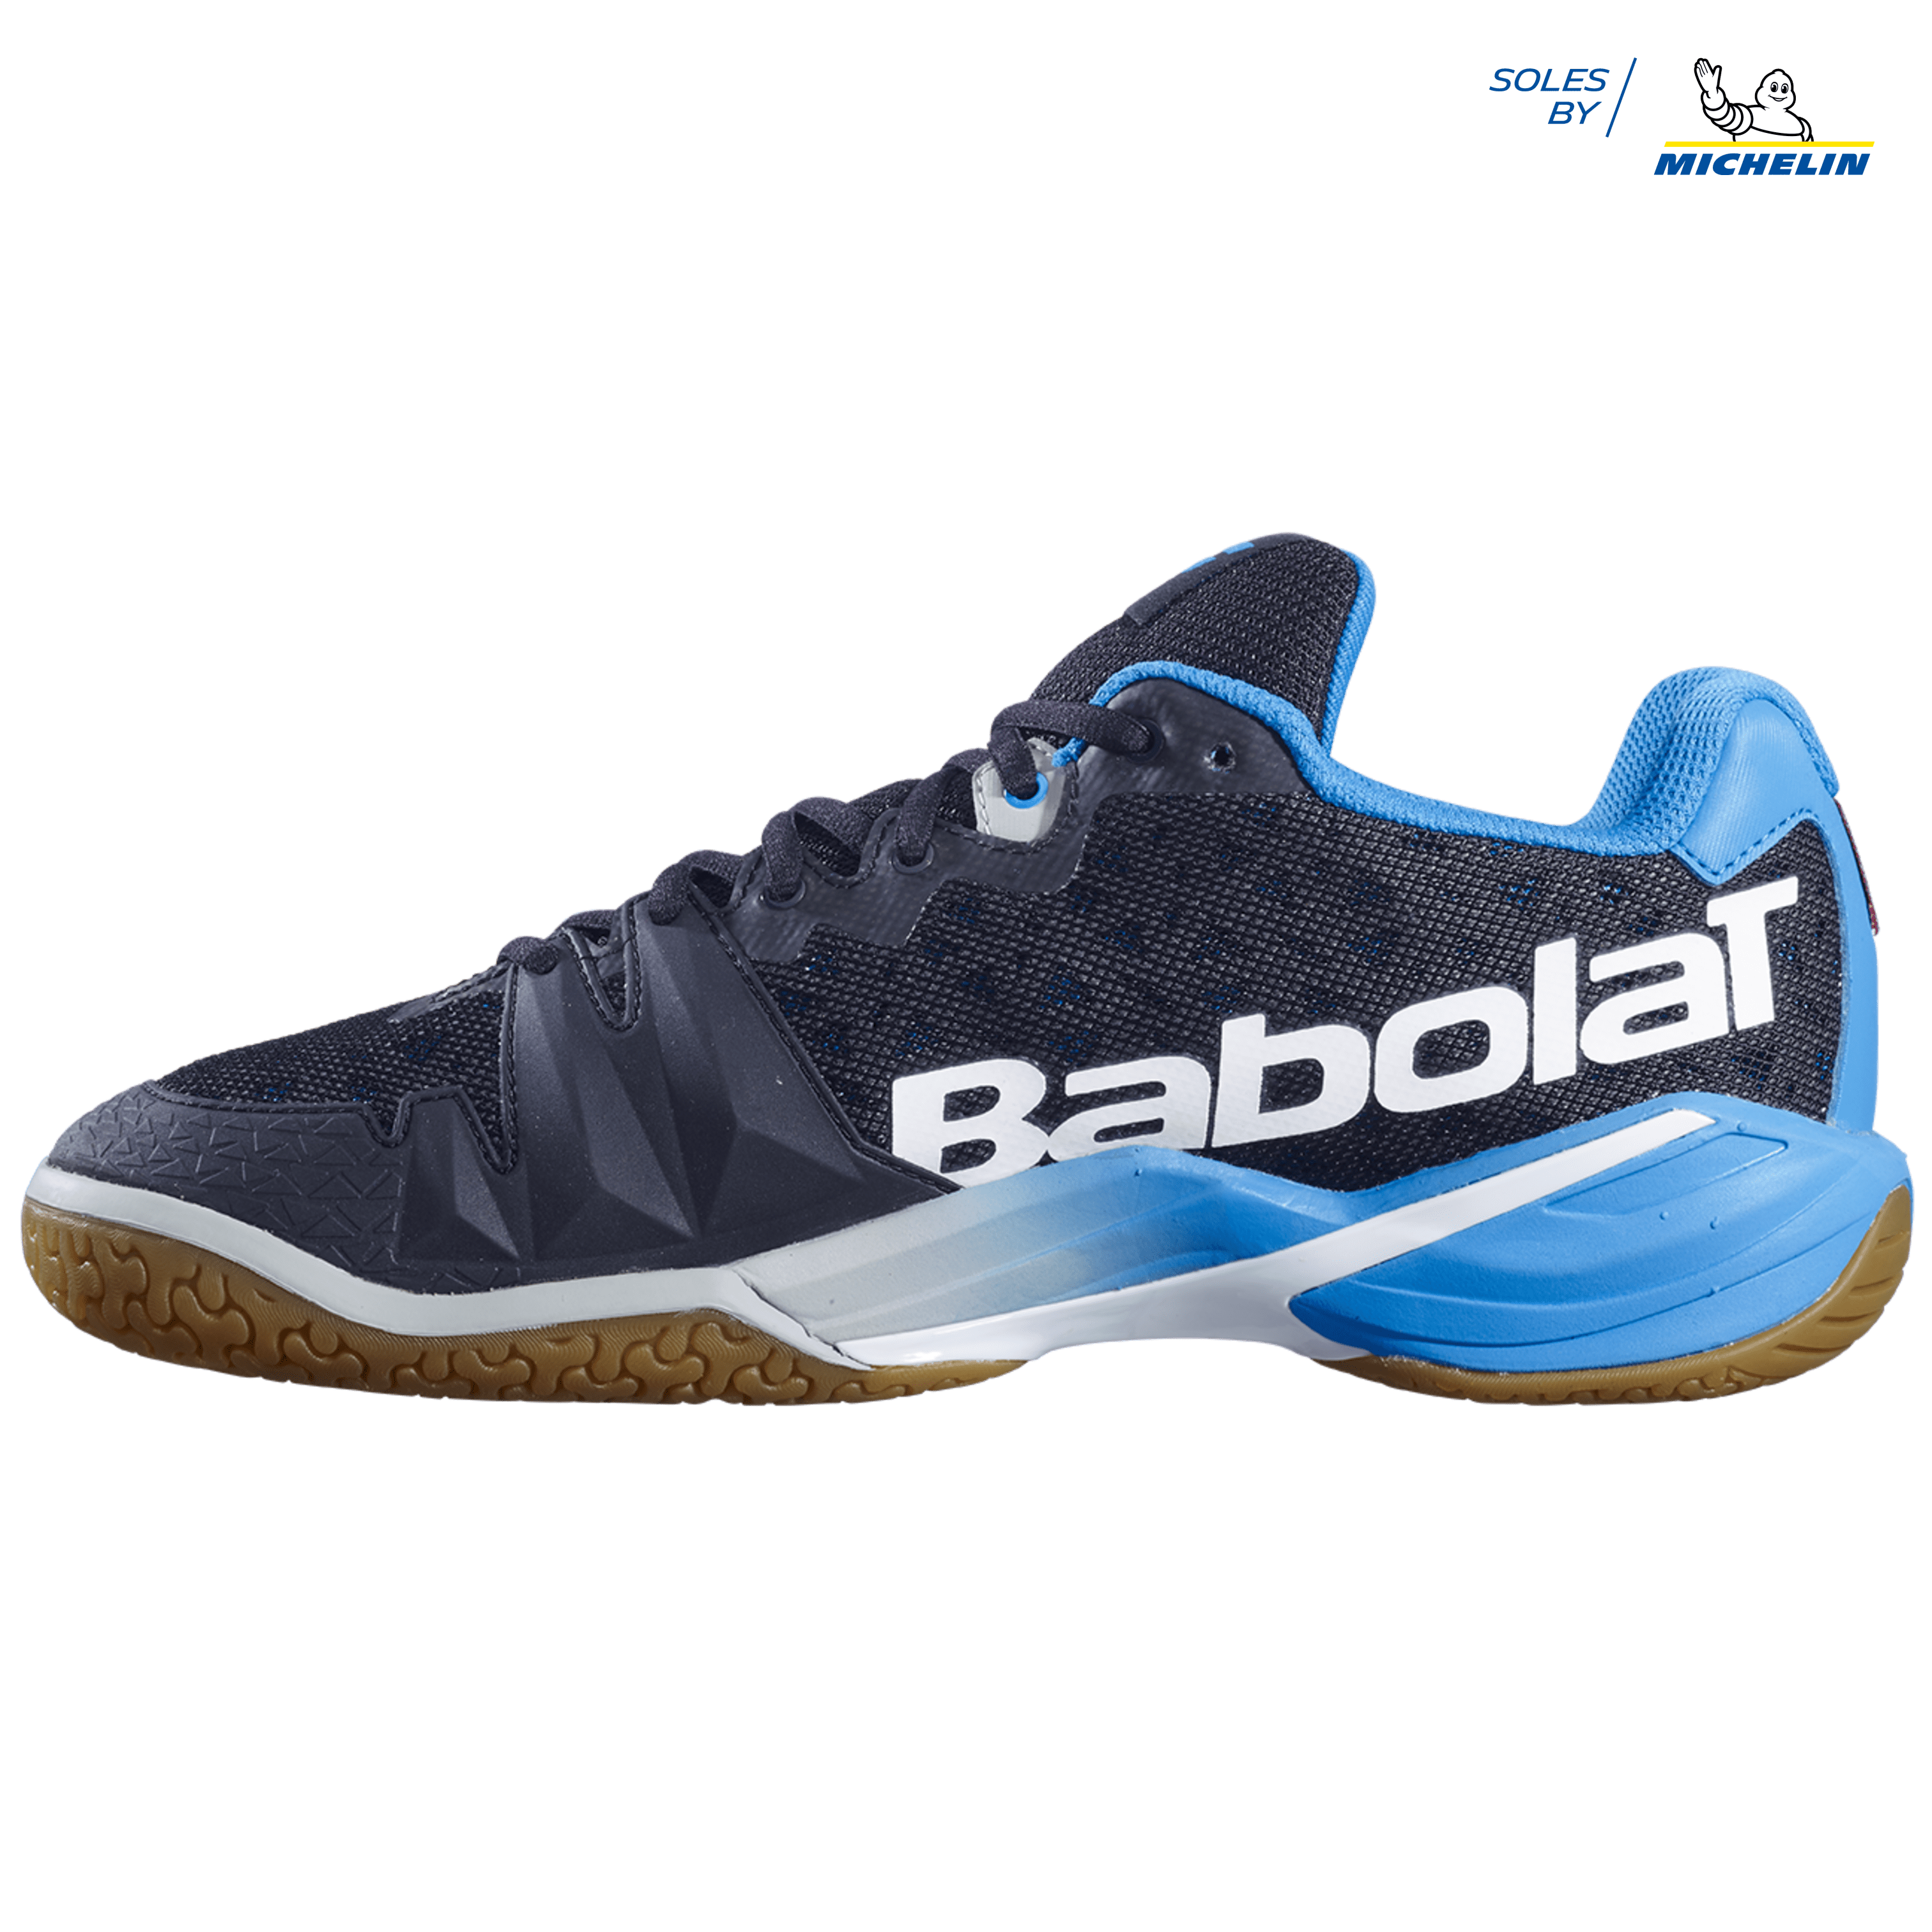 Babolat Mens Shadow Tour Cushioned Supportive All Court Badminton Shoes 